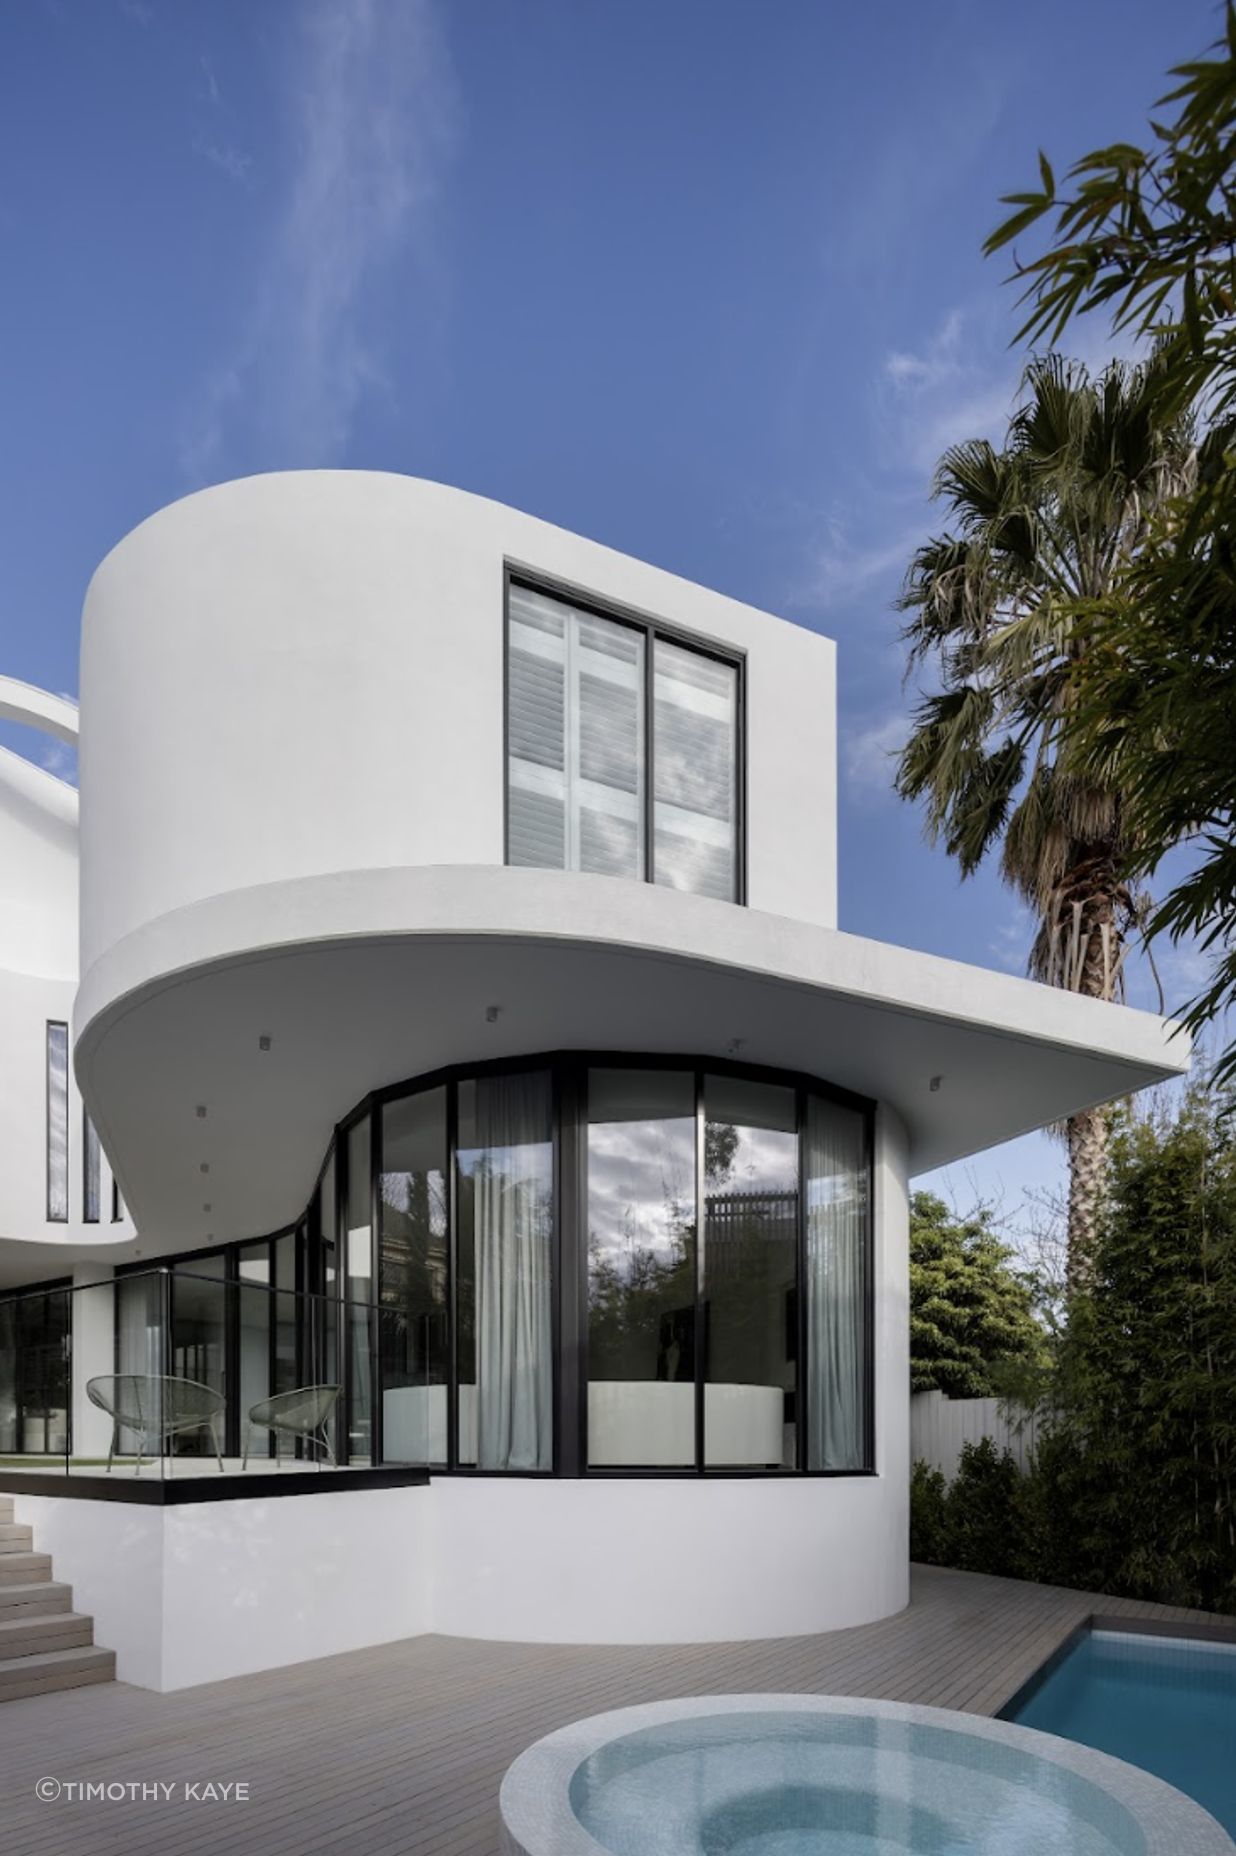 The concrete, formed and moulded into smooth, seamless curves, is coupled with expansive windows that capture light through different times of the day.